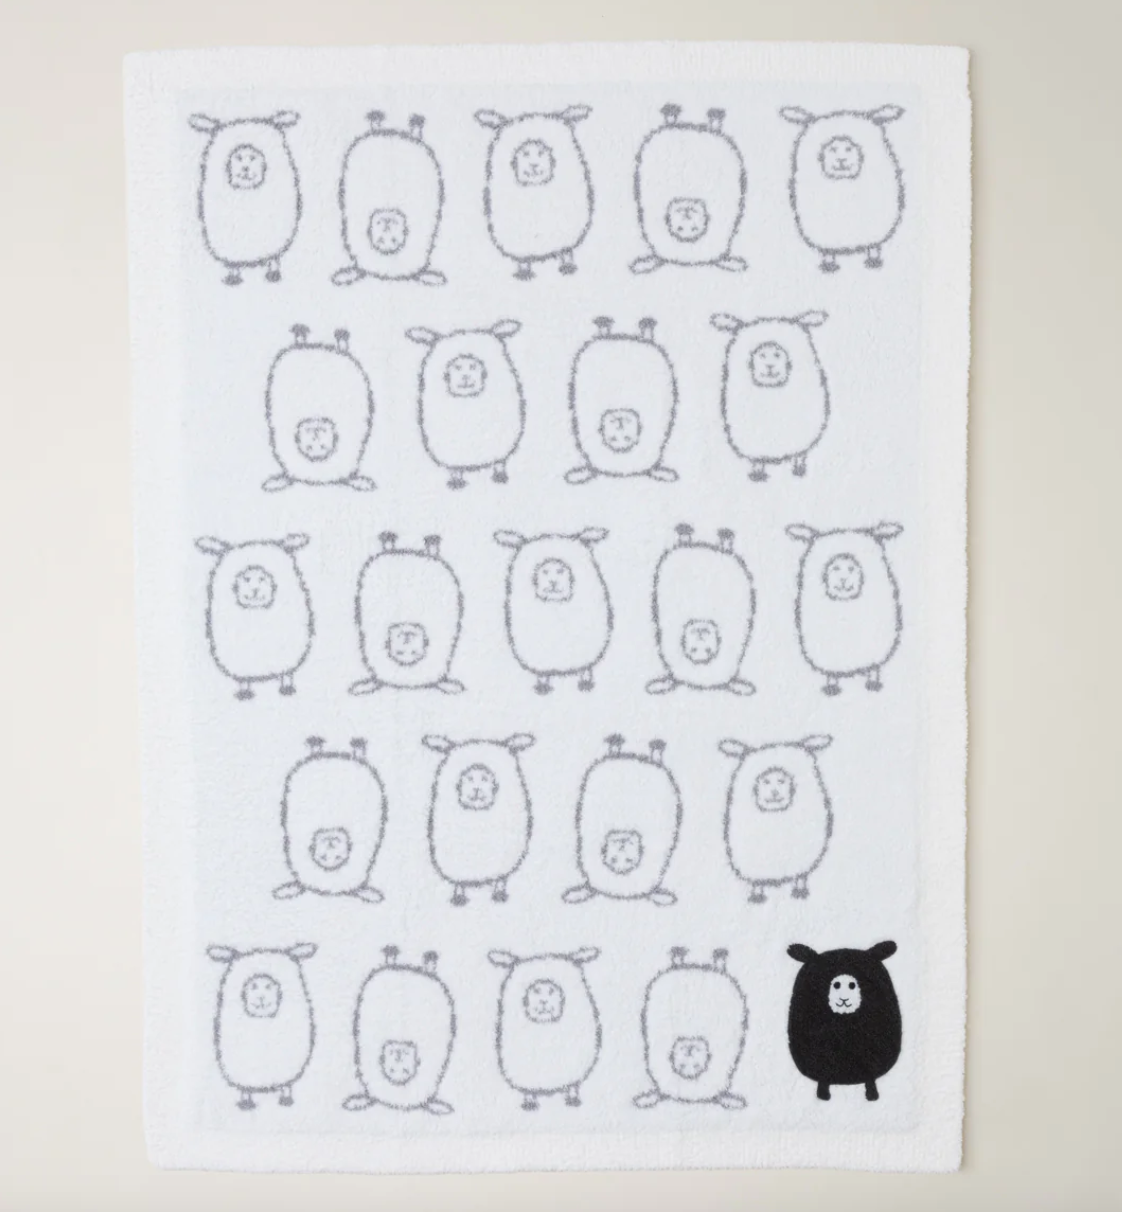 Load image into Gallery viewer, COZYCHIC BLACK SHEEP BABY BLANKET
